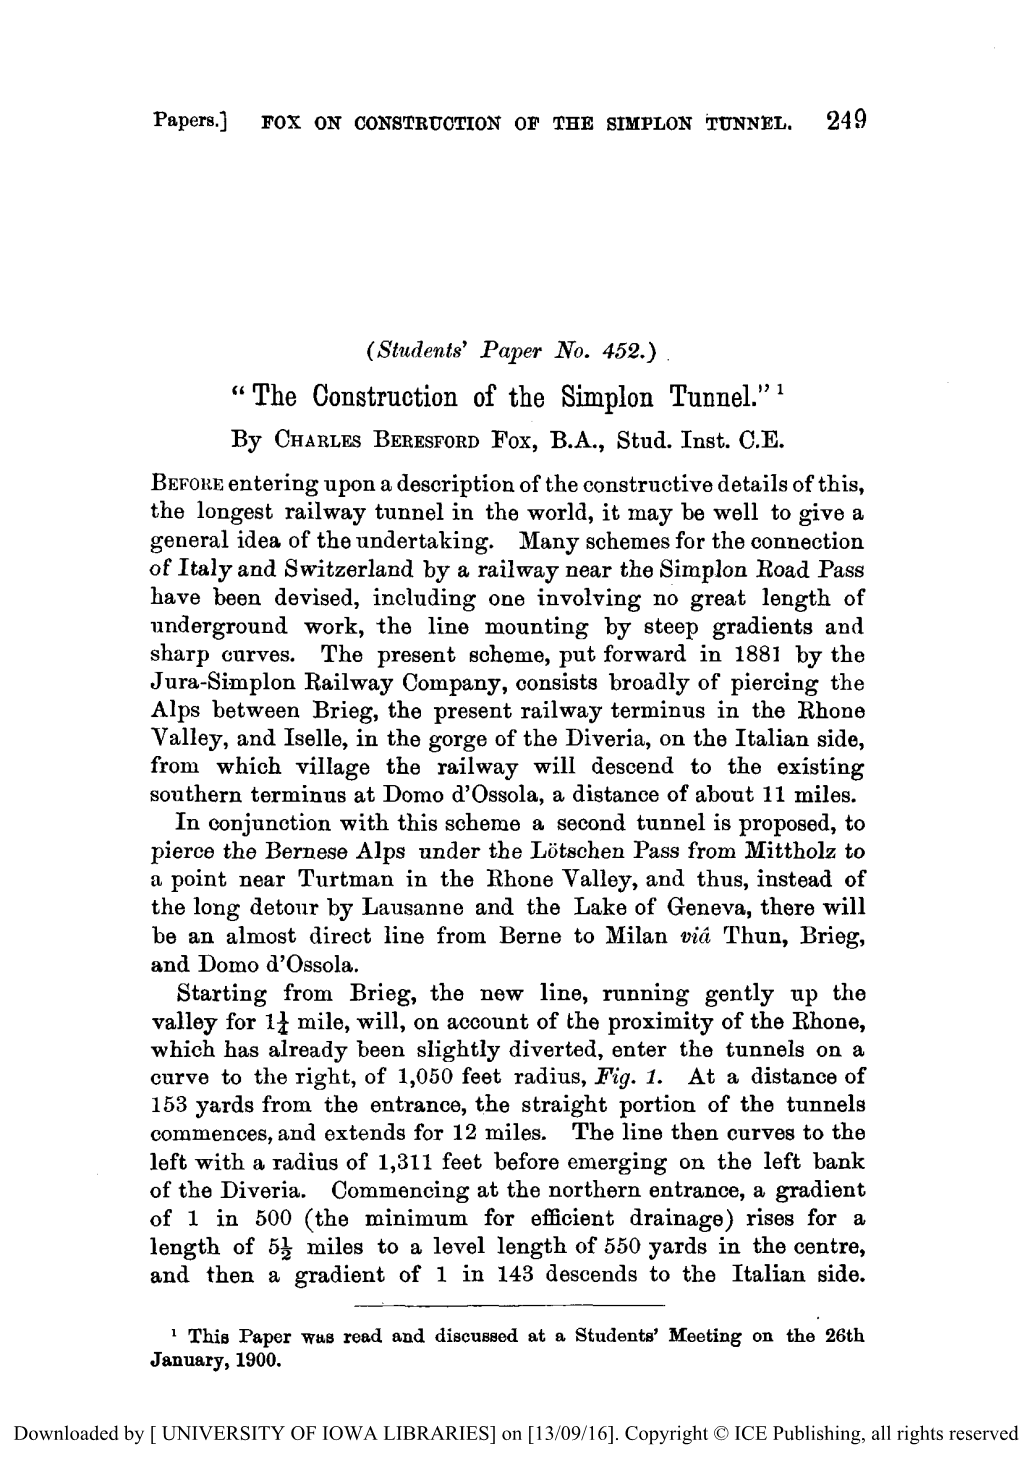 Students' Paper. the Construction of the Simplon